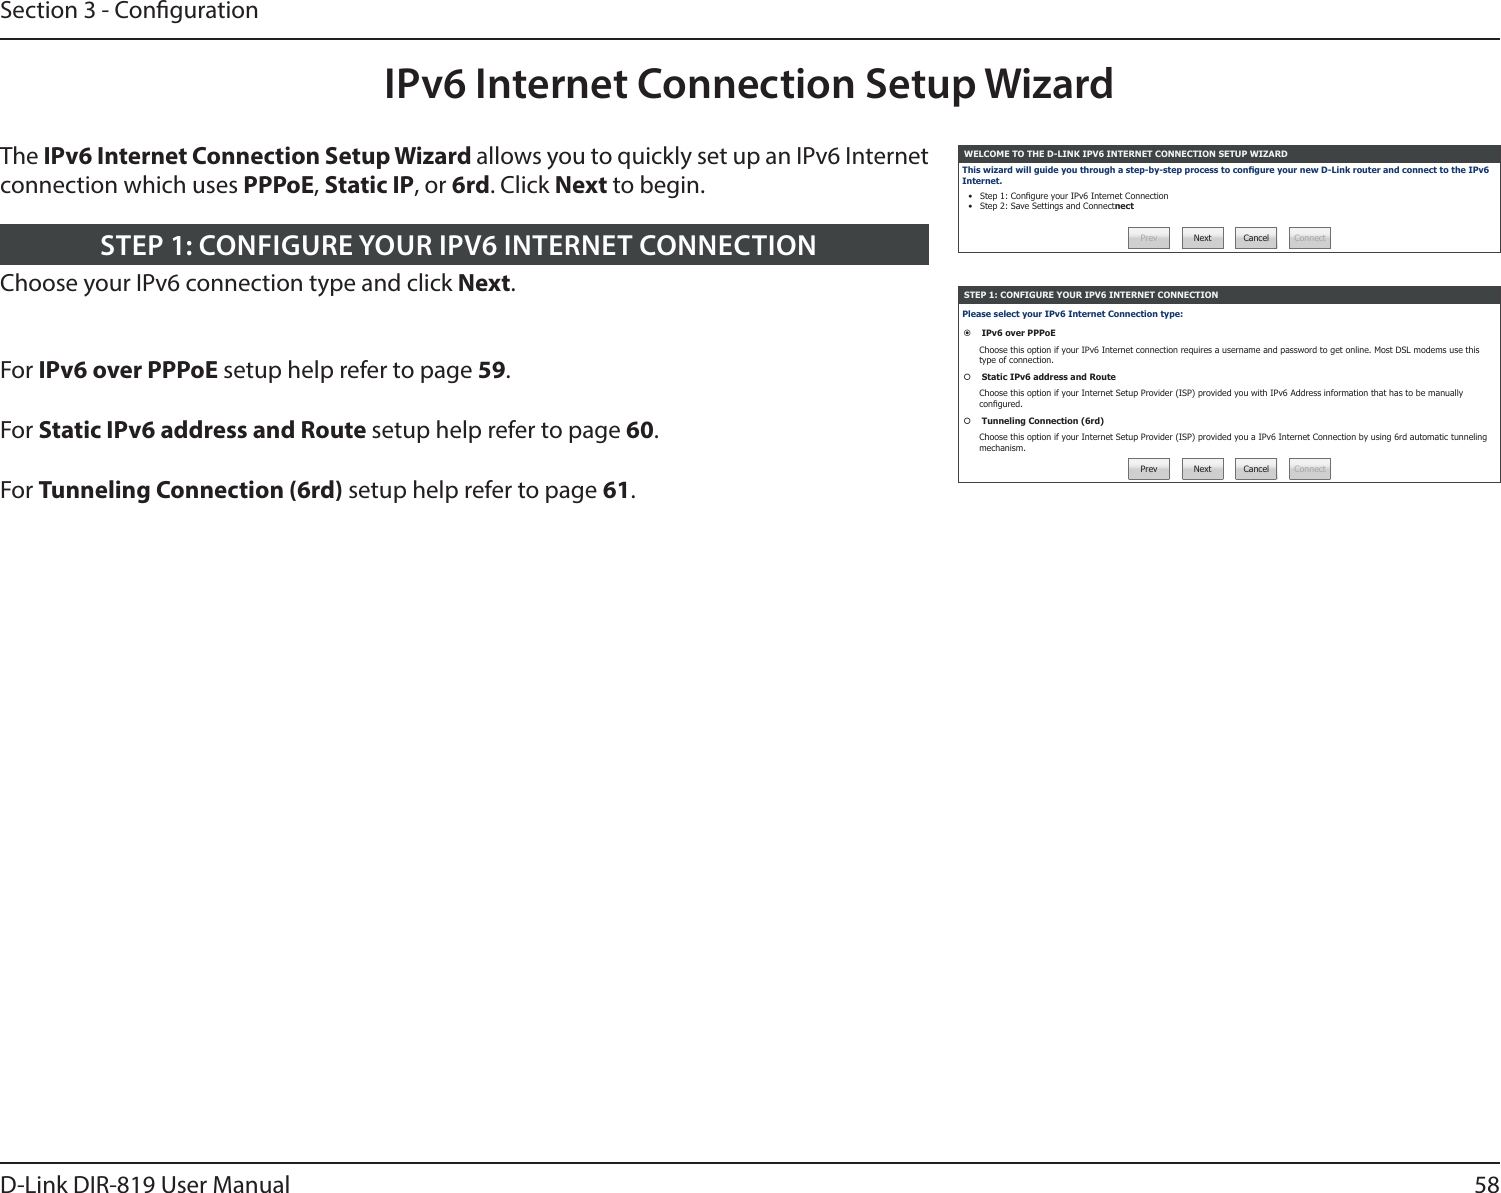 58D-Link DIR-819 User ManualSection 3 - CongurationIPv6 Internet Connection Setup WizardThe IPv6 Internet Connection Setup Wizard allows you to quickly set up an IPv6 Internet connection which uses PPPoE, Static IP, or 6rd. Click Next to begin.WELCOME TO THE D-LINK IPV6 INTERNET CONNECTION SETUP WIZARDThis wizard will guide you through a step-by-step process to congure your new D-Link router and connect to the IPv6 Internet.•  Step 1: Congure your IPv6 Internet Connection•  Step 2: Save Settings and ConnectnectPrev Next Cancel ConnectSTEP 1: CONFIGURE YOUR IPV6 INTERNET CONNECTIONPlease select your IPv6 Internet Connection type: IPv6 over PPPoEChoose this option if your IPv6 Internet connection requires a username and password to get online. Most DSL modems use this type of connection. Static IPv6 address and RouteChoose this option if your Internet Setup Provider (ISP) provided you with IPv6 Address information that has to be manually congured. Tunneling Connection (6rd)Choose this option if your Internet Setup Provider (ISP) provided you a IPv6 Internet Connection by using 6rd automatic tunneling mechanism.Prev Next Cancel ConnectChoose your IPv6 connection type and click Next.STEP 1: CONFIGURE YOUR IPV6 INTERNET CONNECTIONFor IPv6 over PPPoE setup help refer to page 59.For Static IPv6 address and Route setup help refer to page 60.For Tunneling Connection (6rd) setup help refer to page 61.